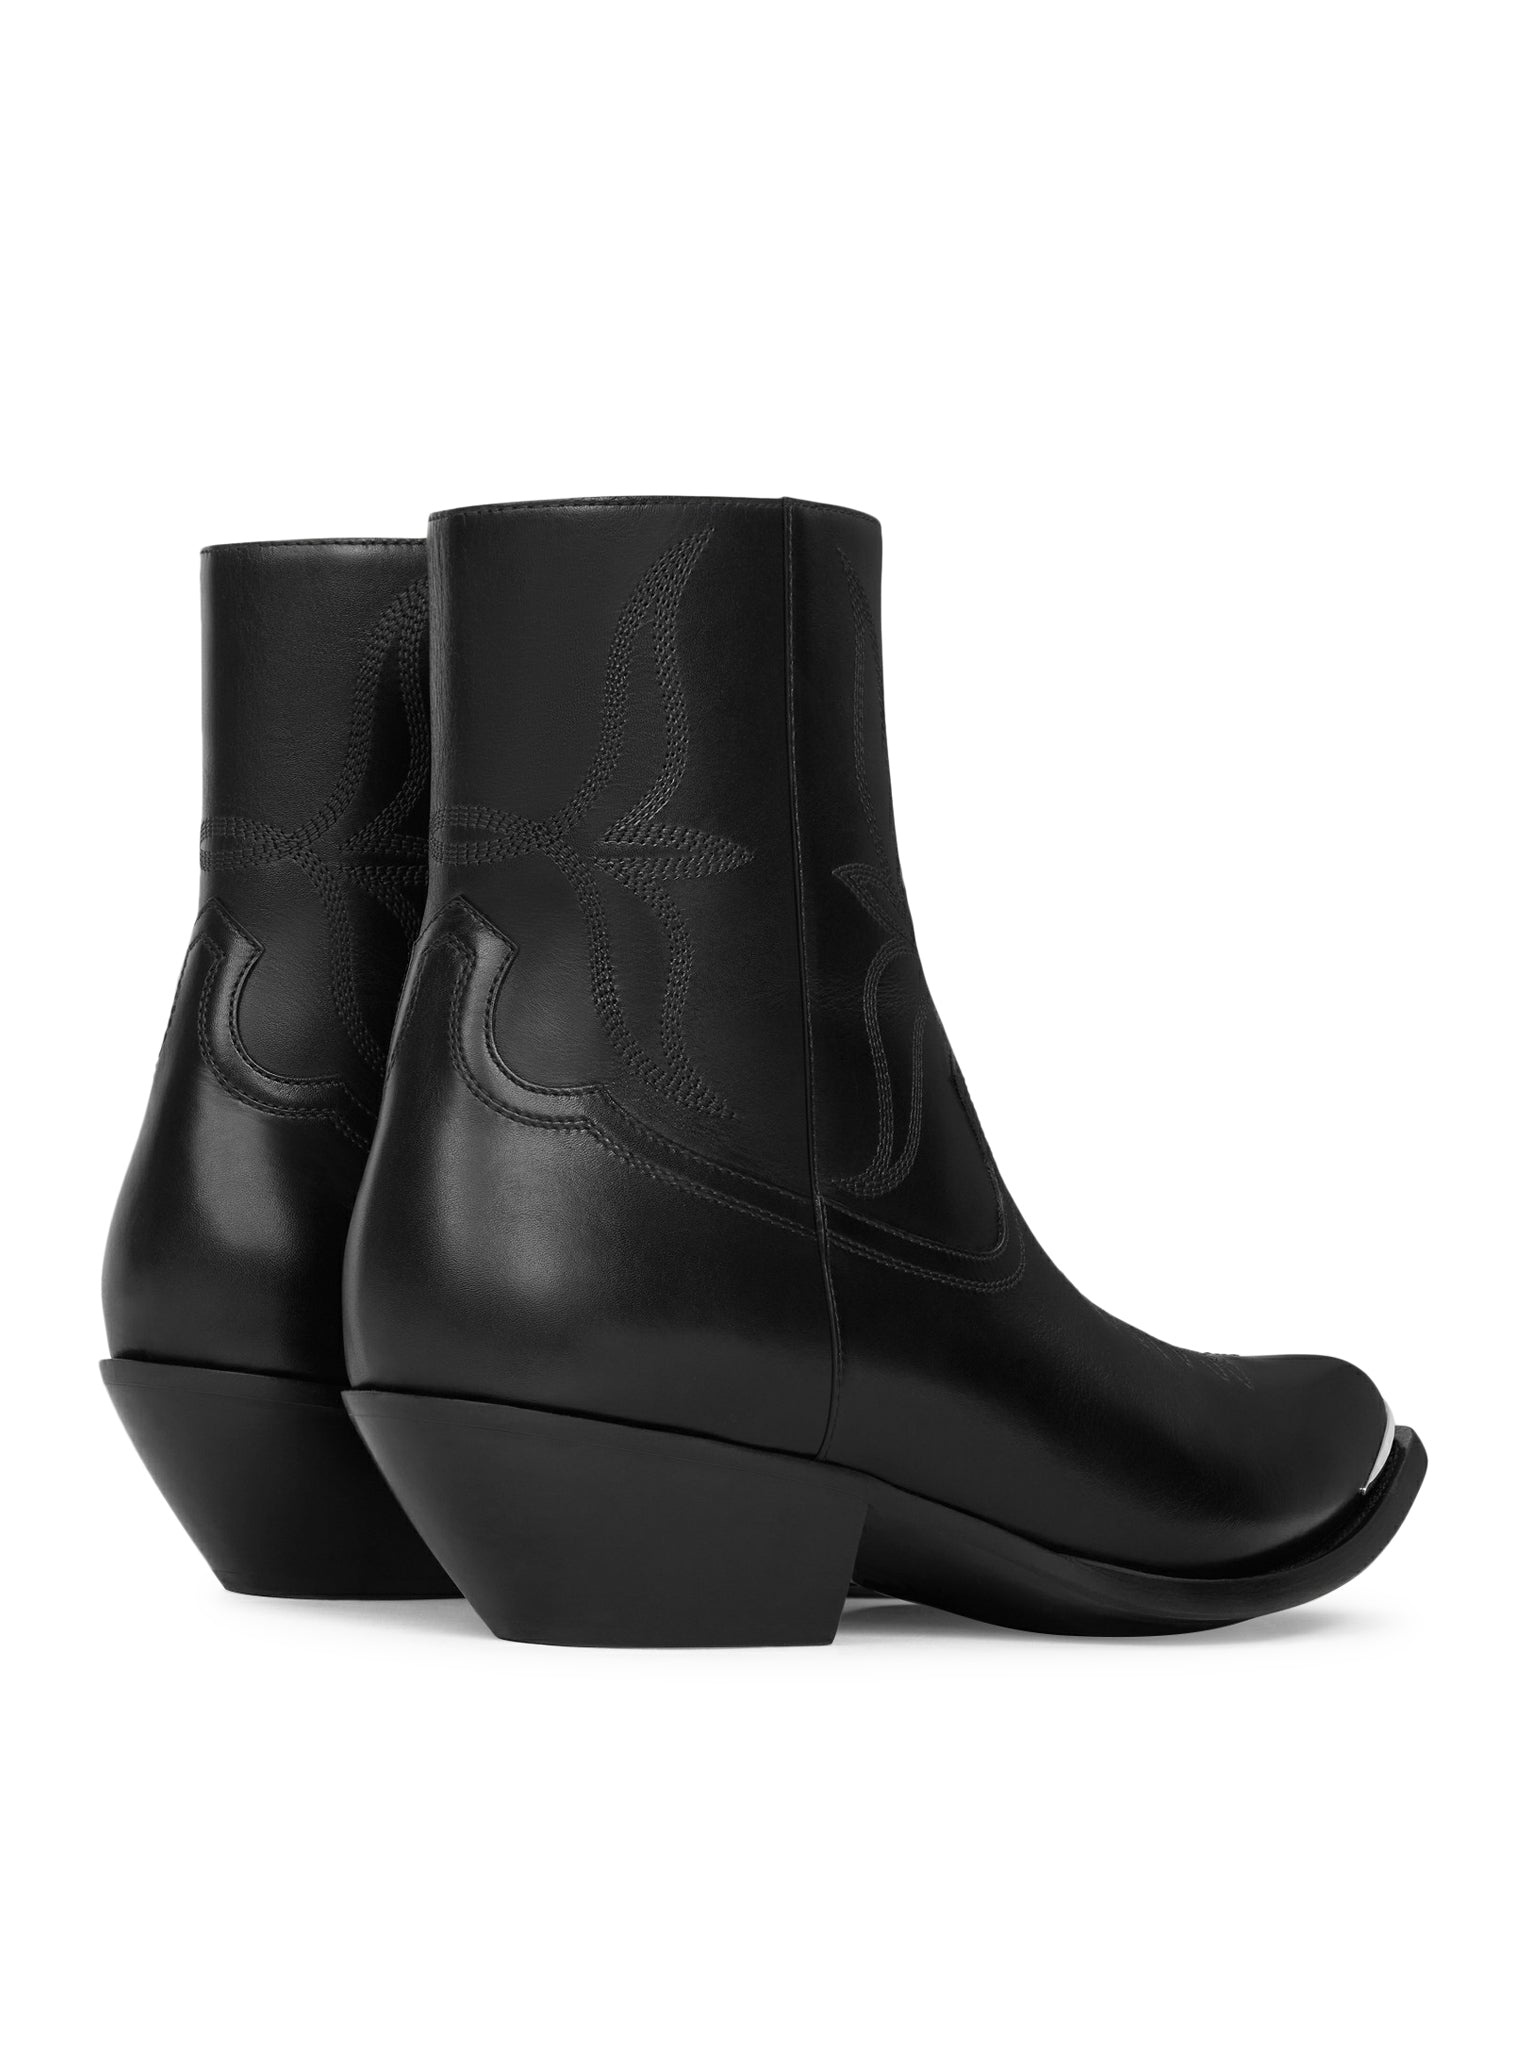 CELINE LEON BOOT WITH ZIP AND METAL TOE IN POLISHED CALFSKIN - 3